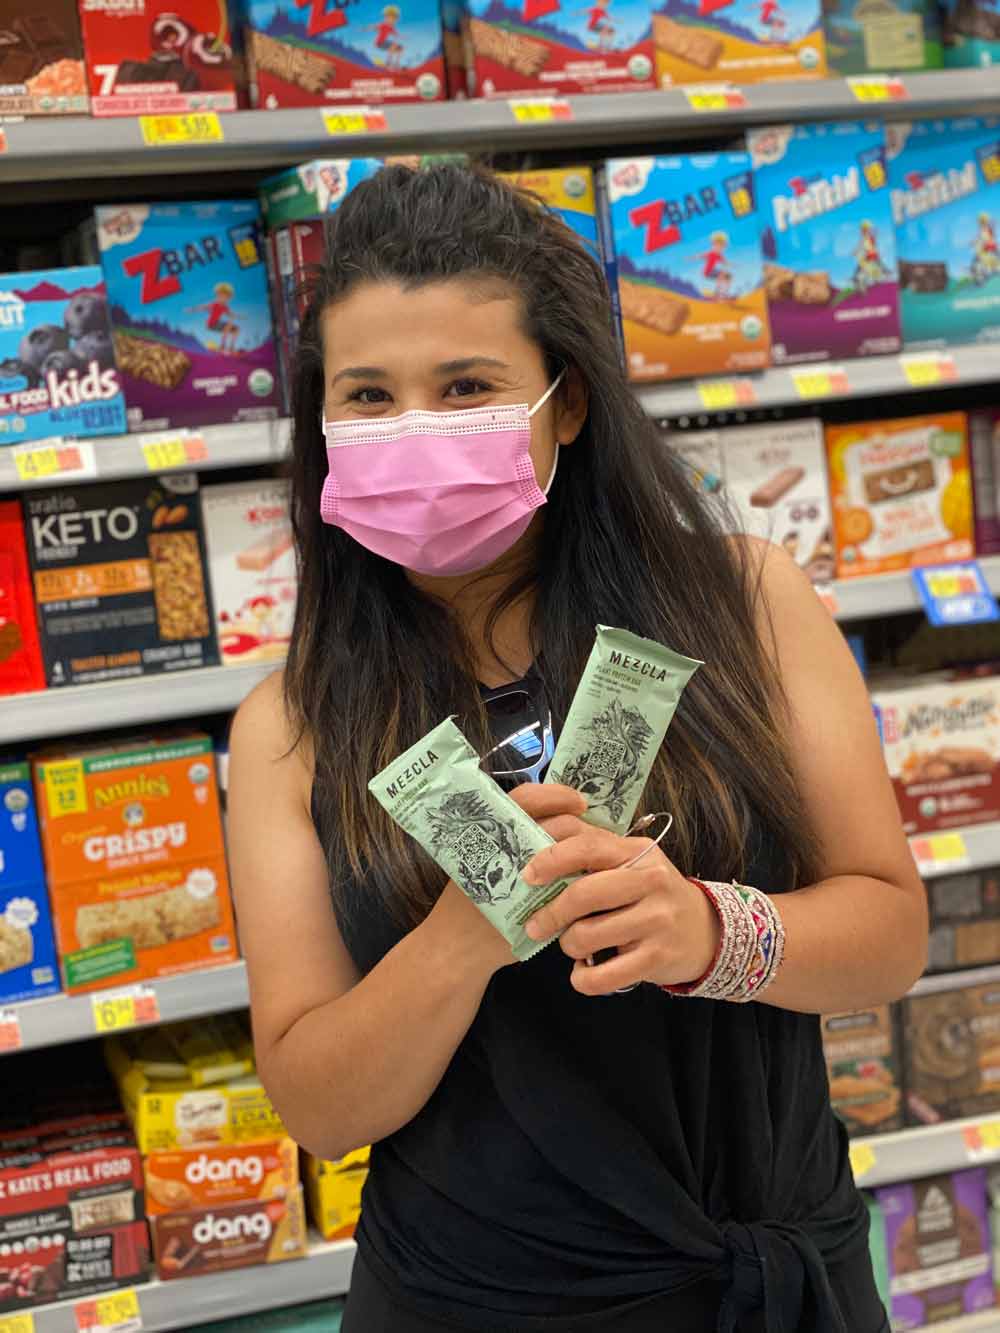 Coco Sotelo in a grocery store showing to Mezcla bars